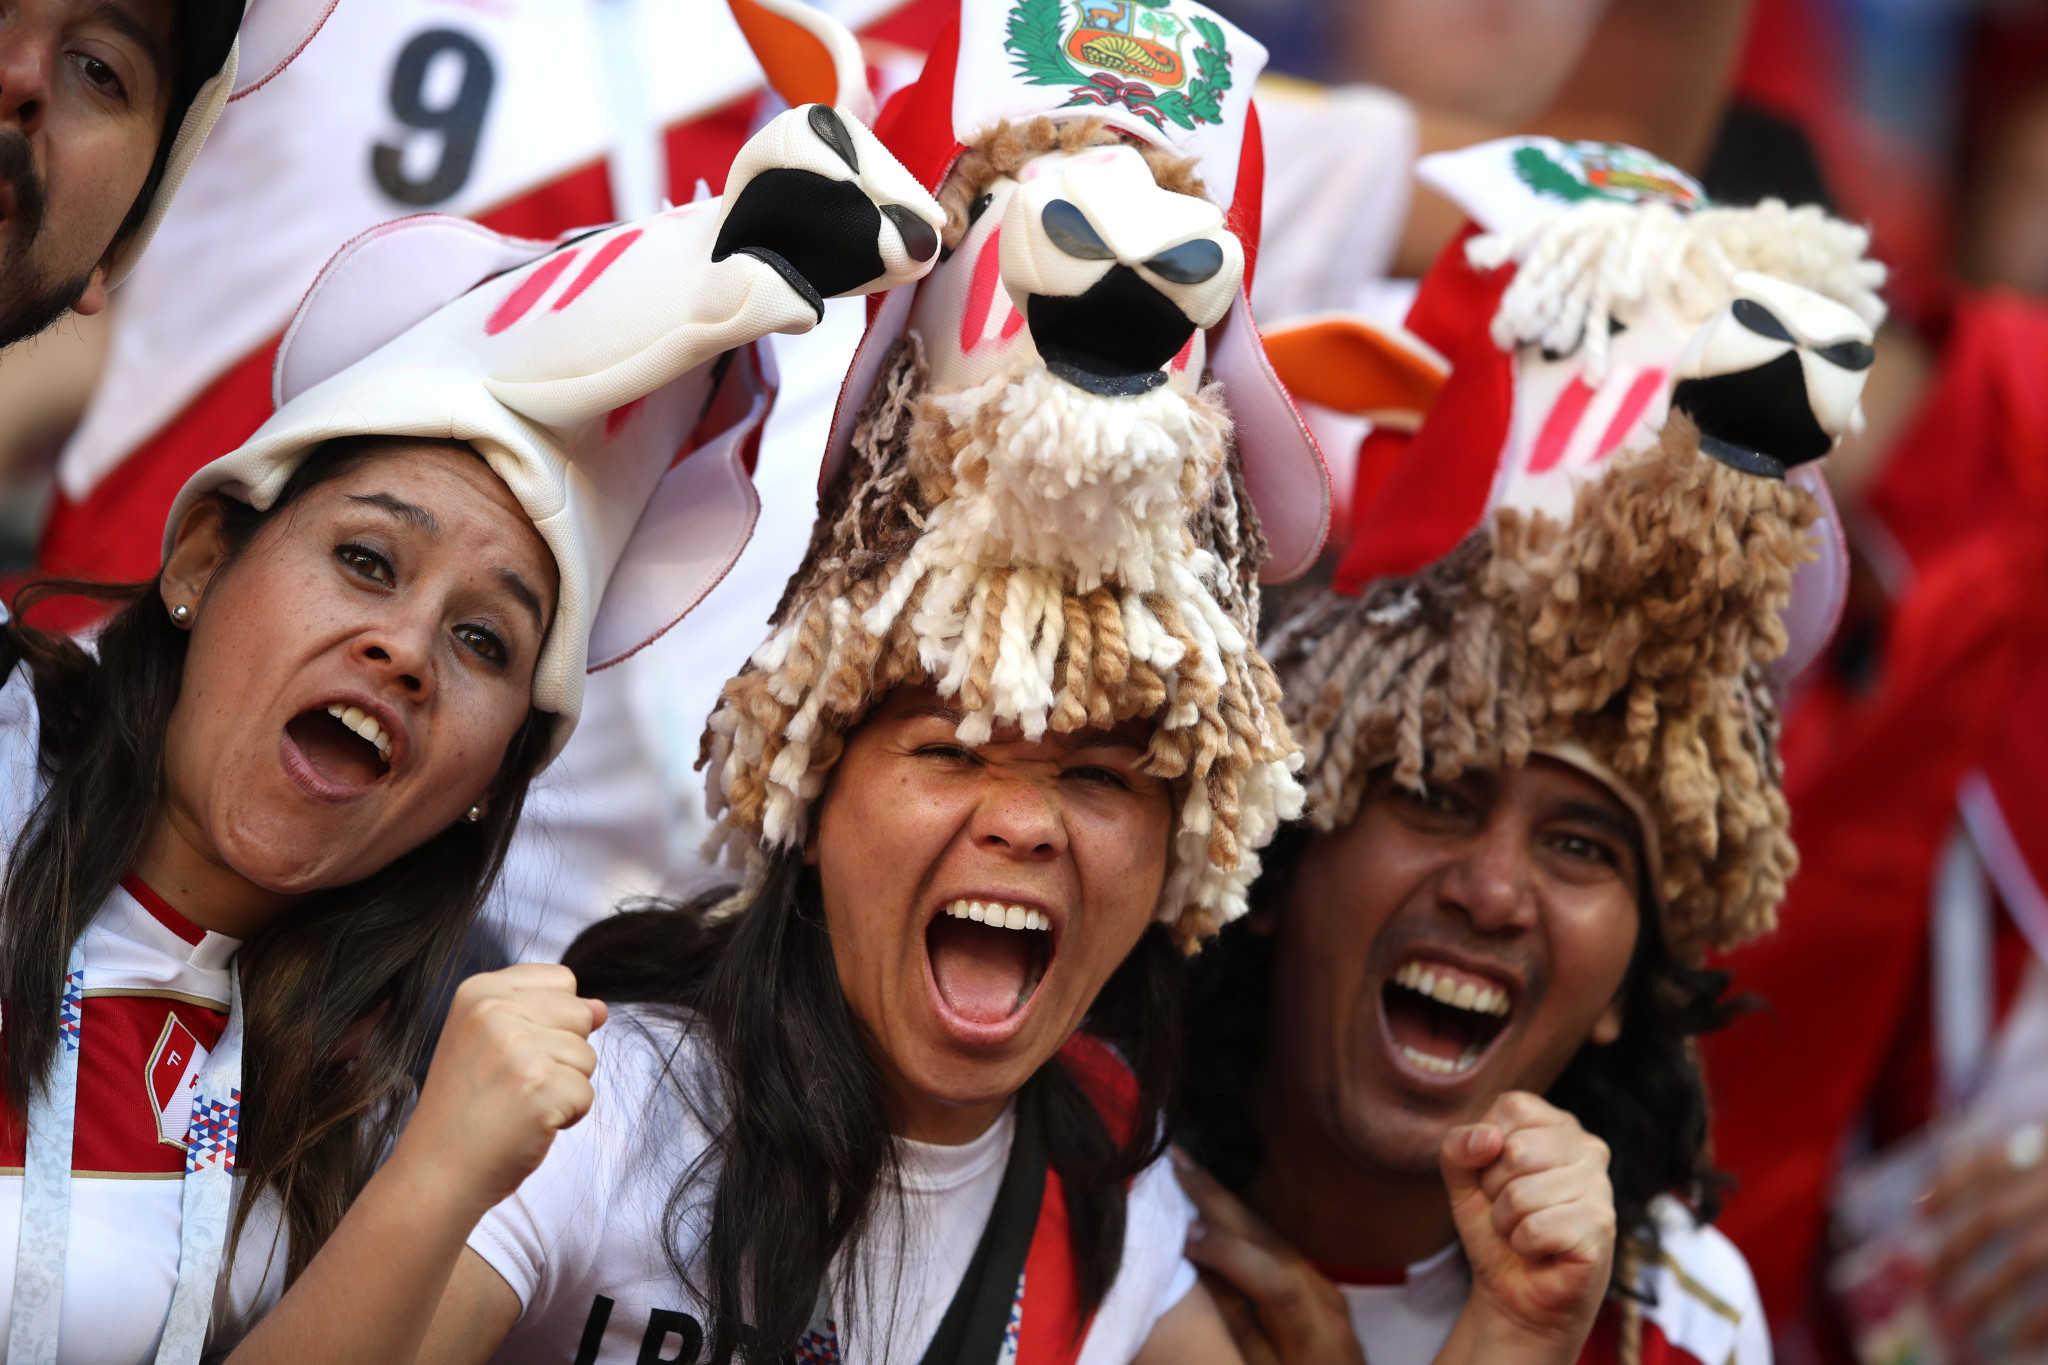 Peru supporters have been among the most enthusiastic in Russia so far ©Getty Images